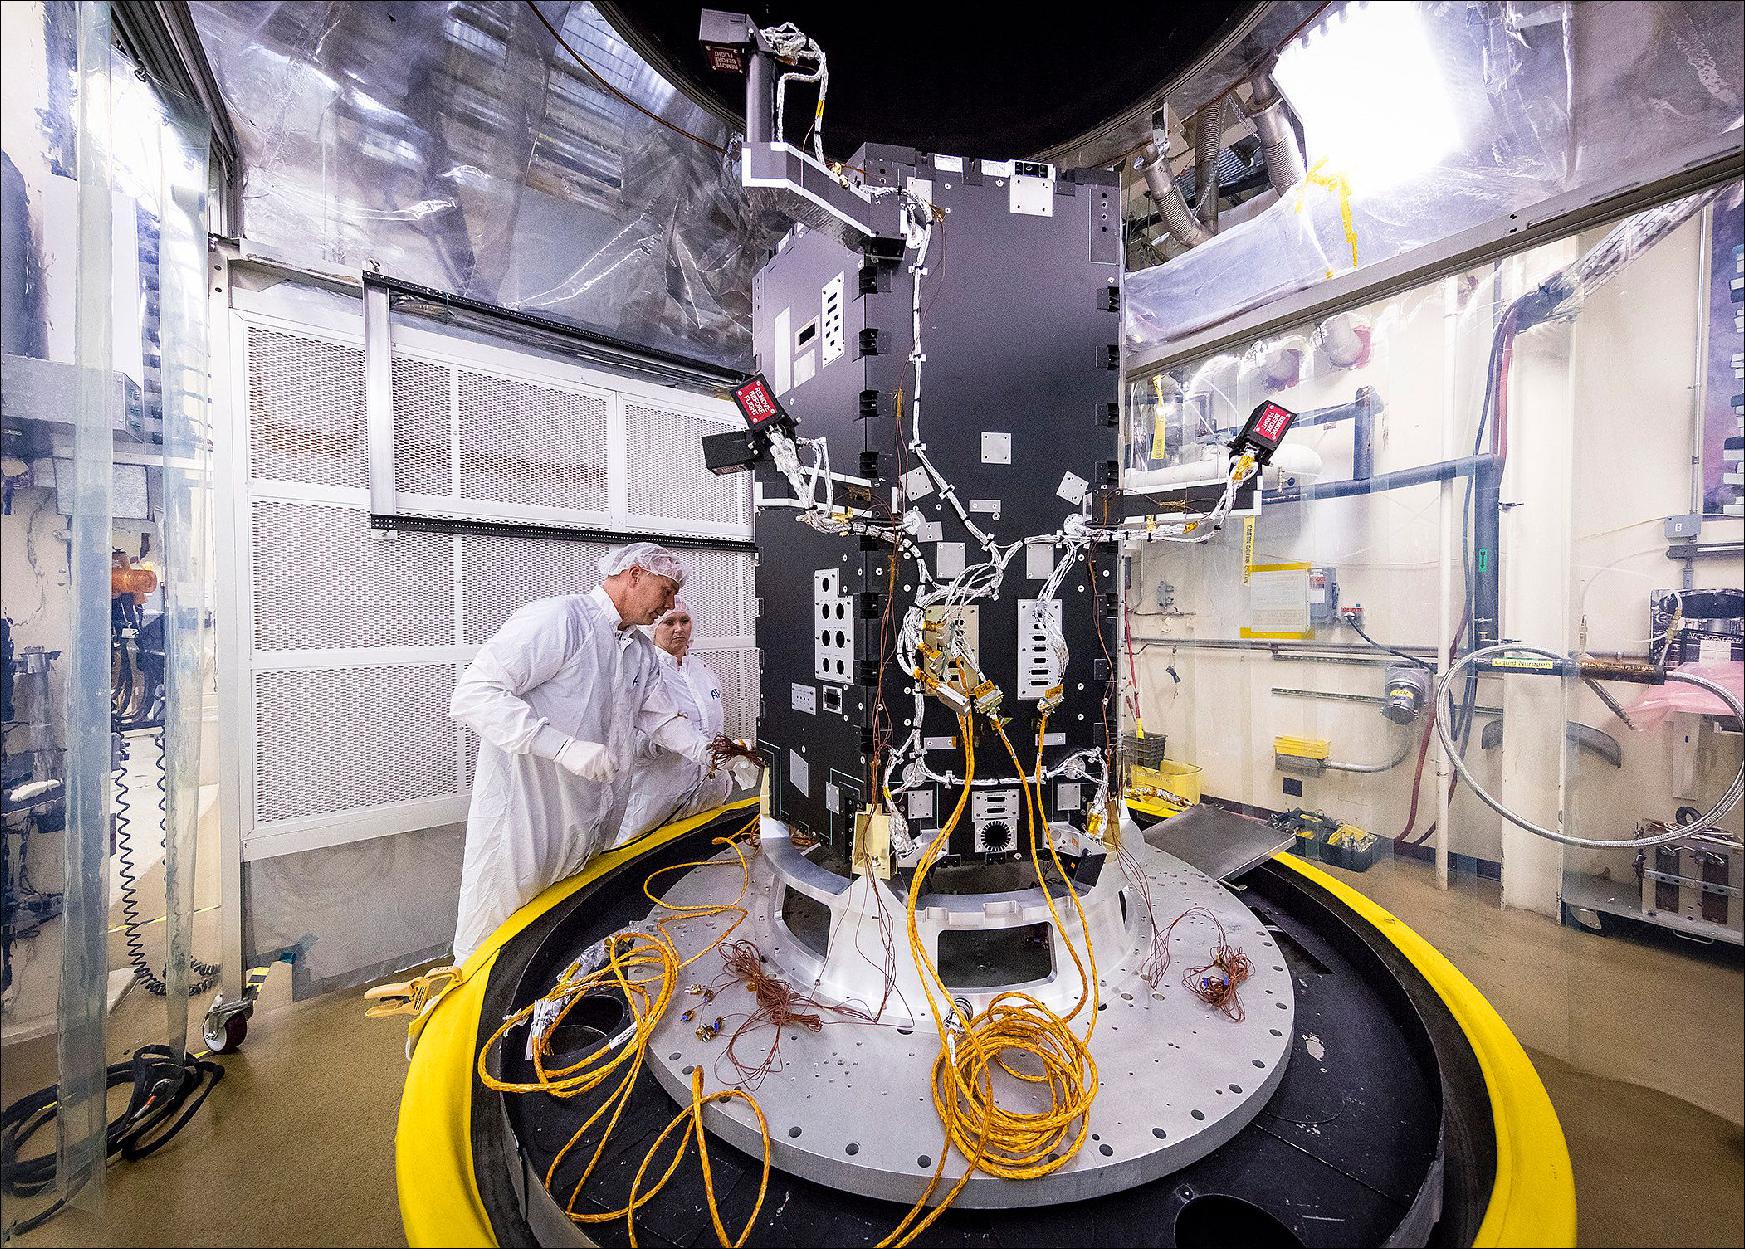 Figure 131: Engineers at JHU/APL in Laurel, Maryland, prepare the developing Solar Probe Plus spacecraft for thermal vacuum tests that simulate conditions in space. Today, the spacecraft includes the primary structure and its propulsion system; still to be installed over the next several months are critical systems such as power, communications and thermal protection, as well as science instruments. The probe is scheduled for launch in summer 2018 (image credit: NASA, JHU/APL)